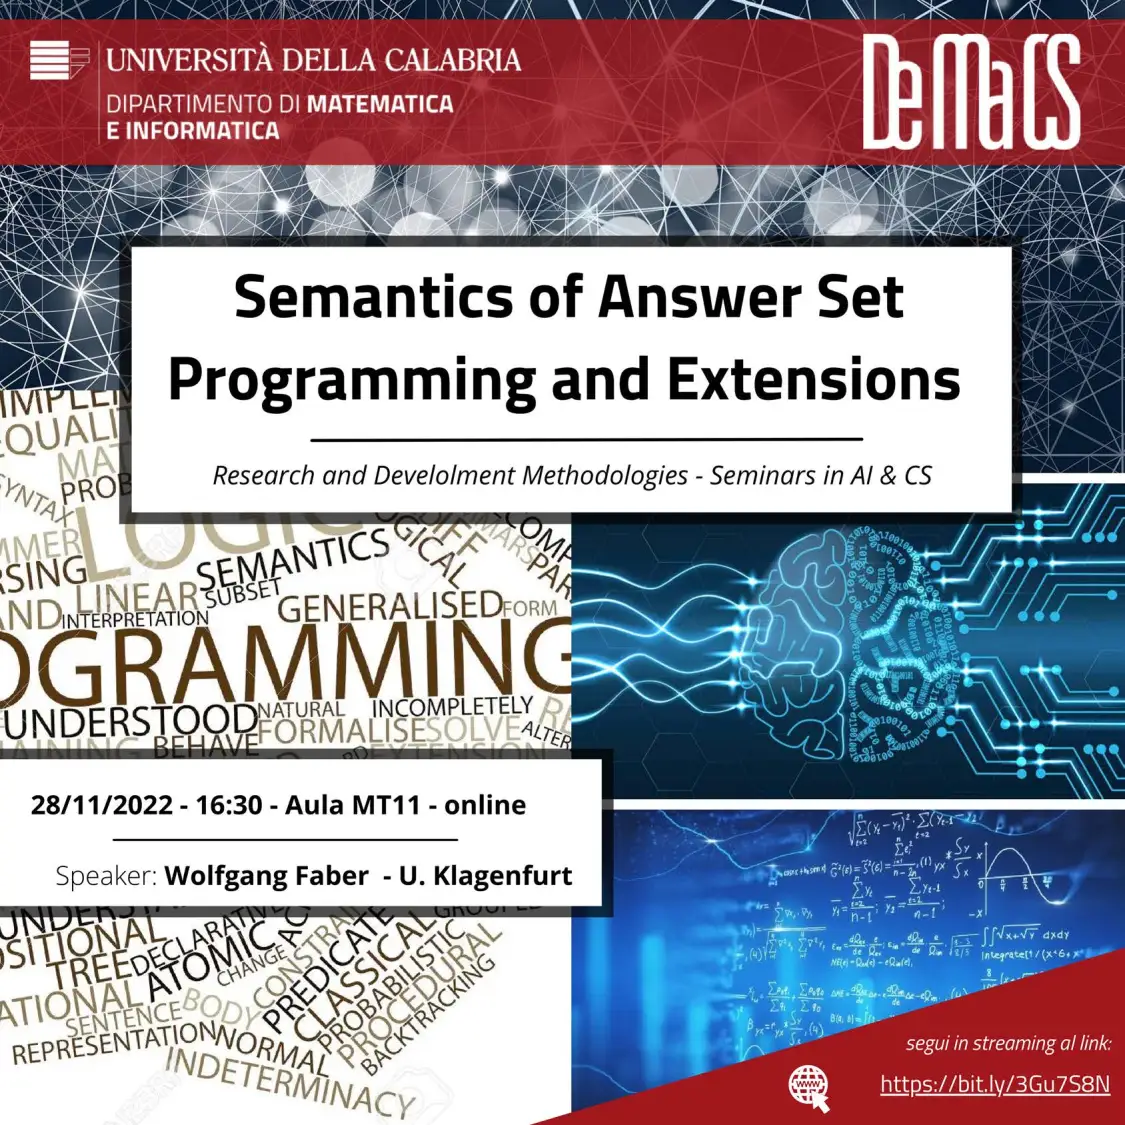 Semantics of Answer Set Programming and Extensions, Wolfgang Faber, 28/11/2022